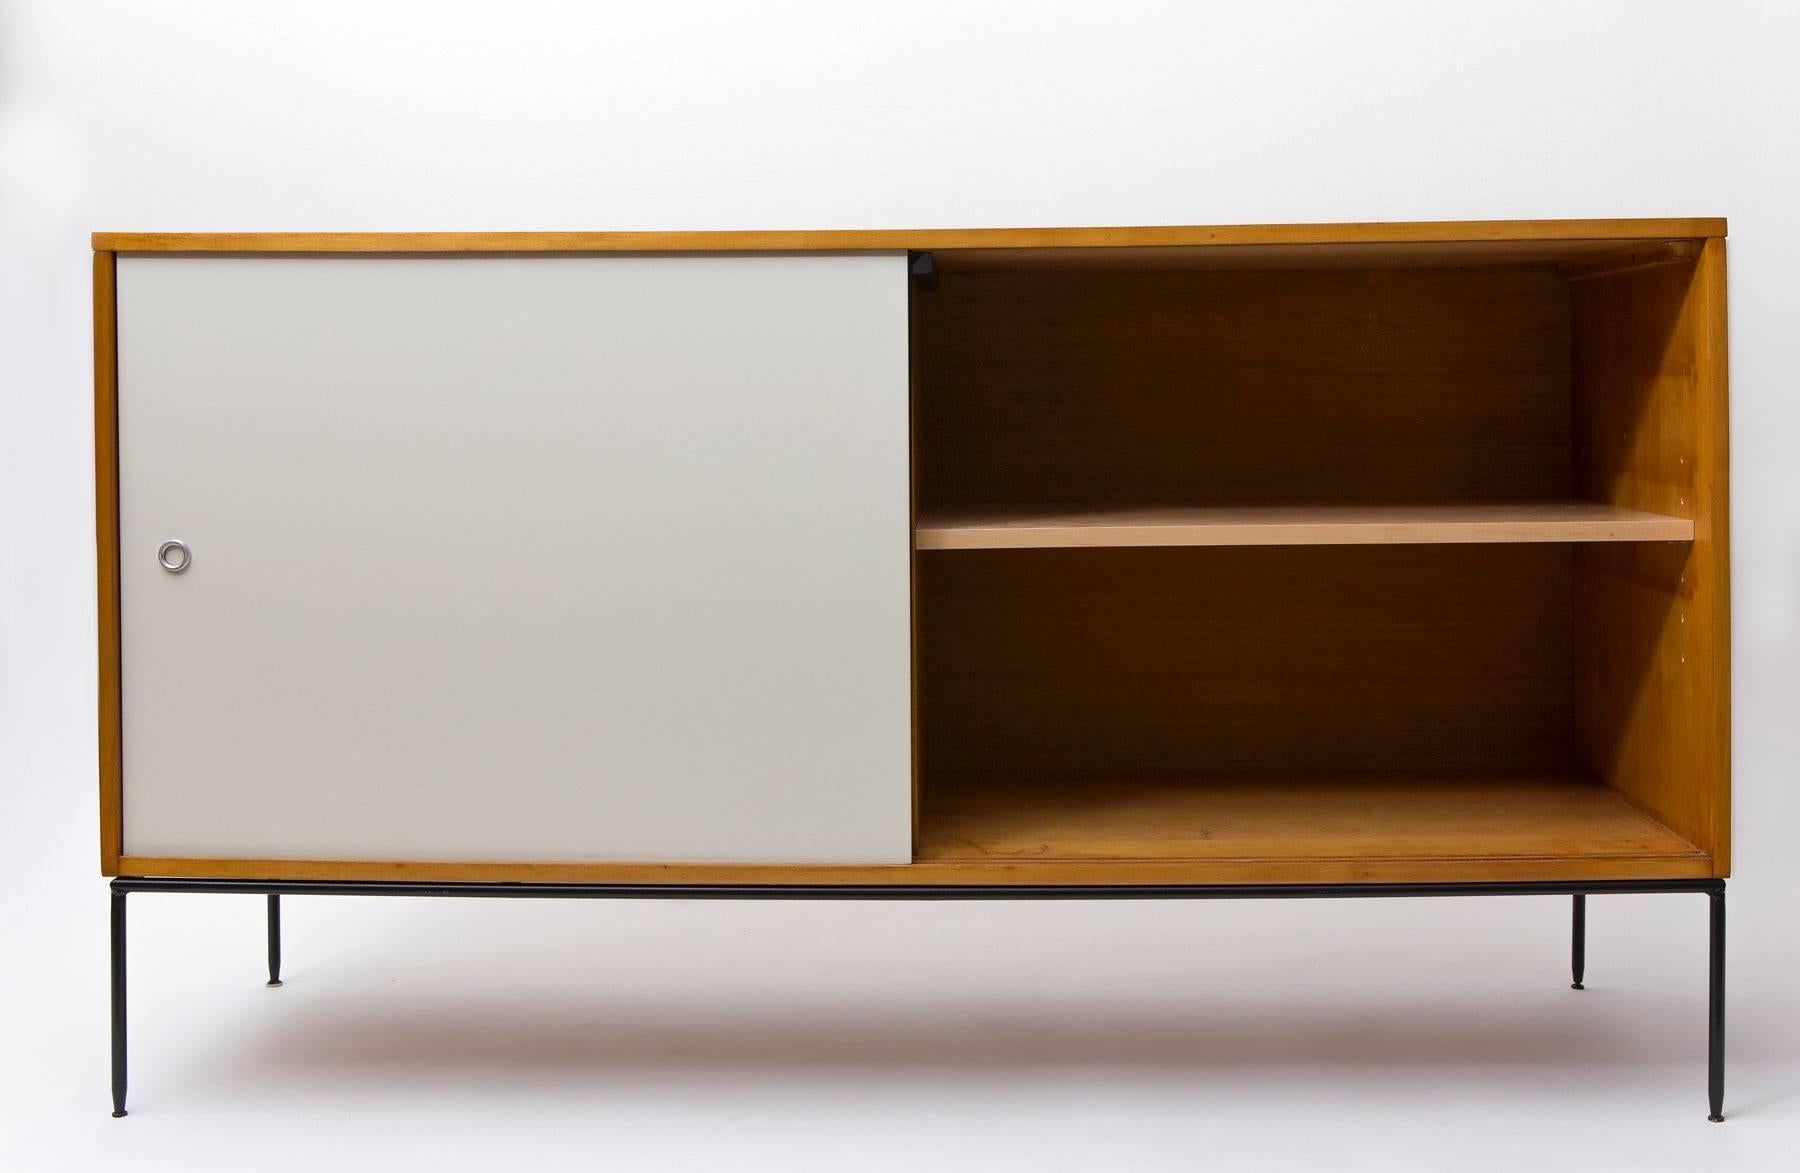 Paul McCobb solid maple sideboard with iron base and black/white Masonite doors, 1950s. Planner Group.